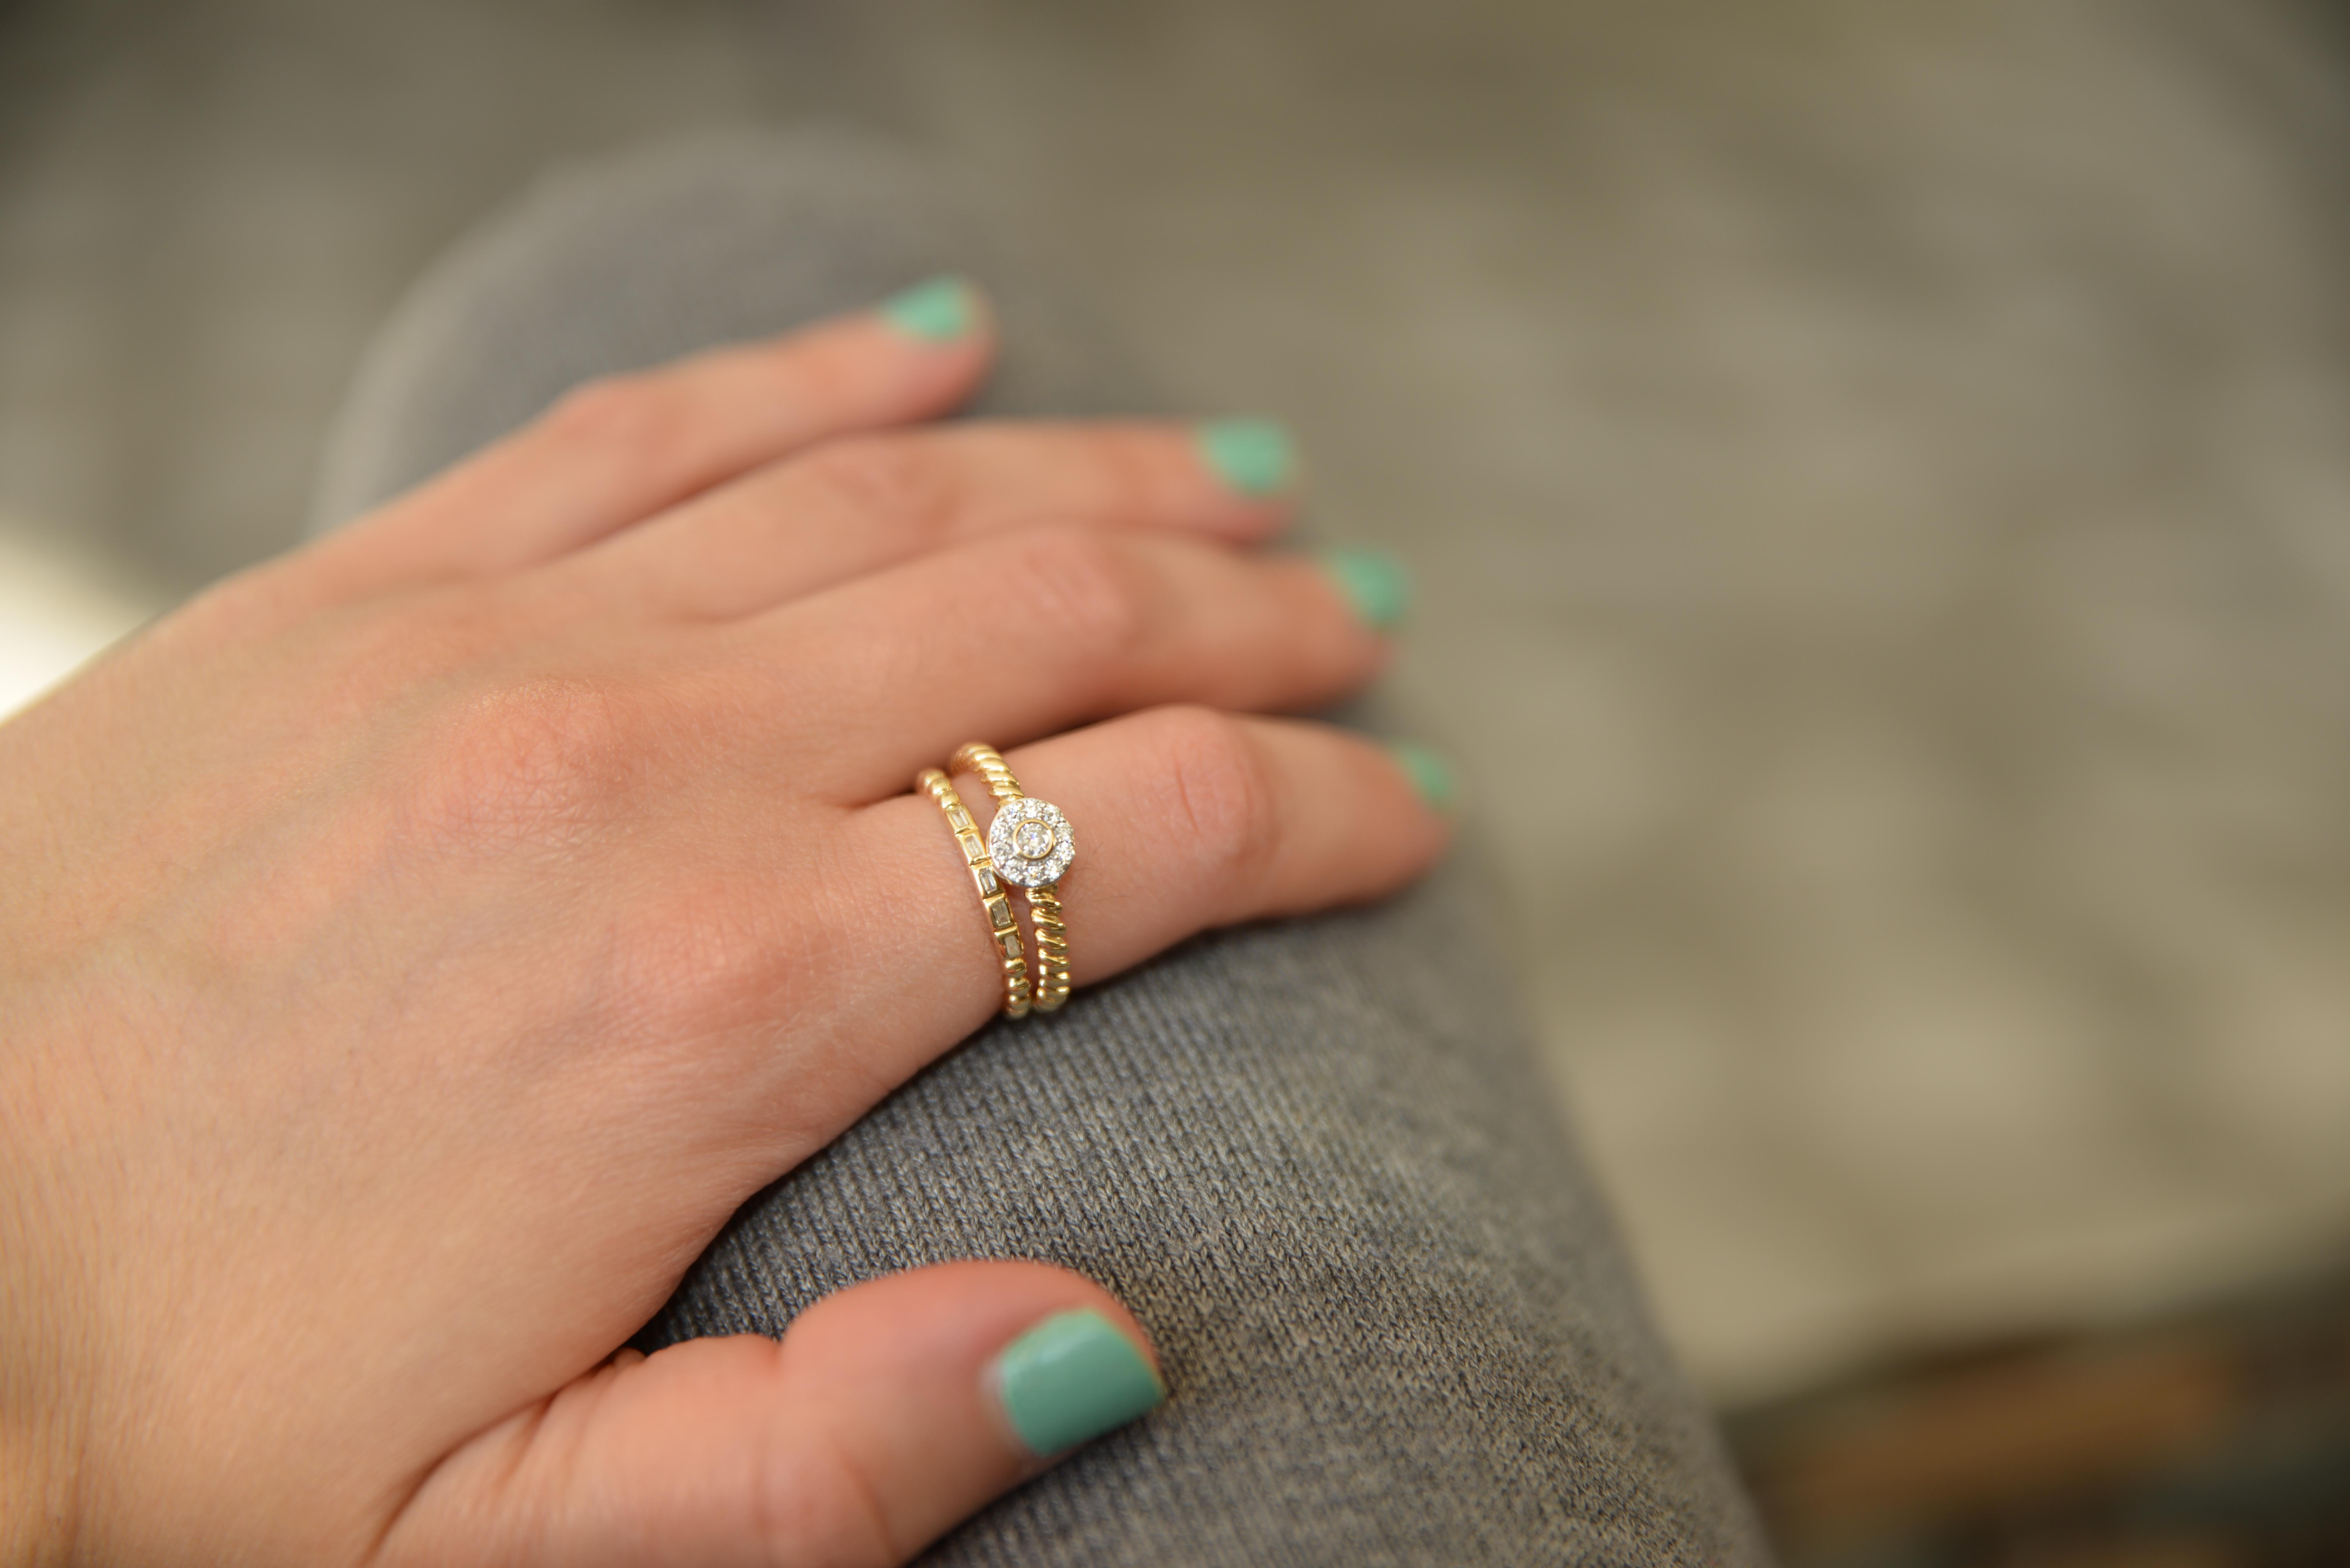 Discover the stylish designs of our fashion jewelry featuring this diamond ring with a halo based on the classic rope chain design. Wear as a fashion ring, a stackable ring, or a unique wedding ring.

14K Yellow Gold Diamond Ring
Diamond weight: